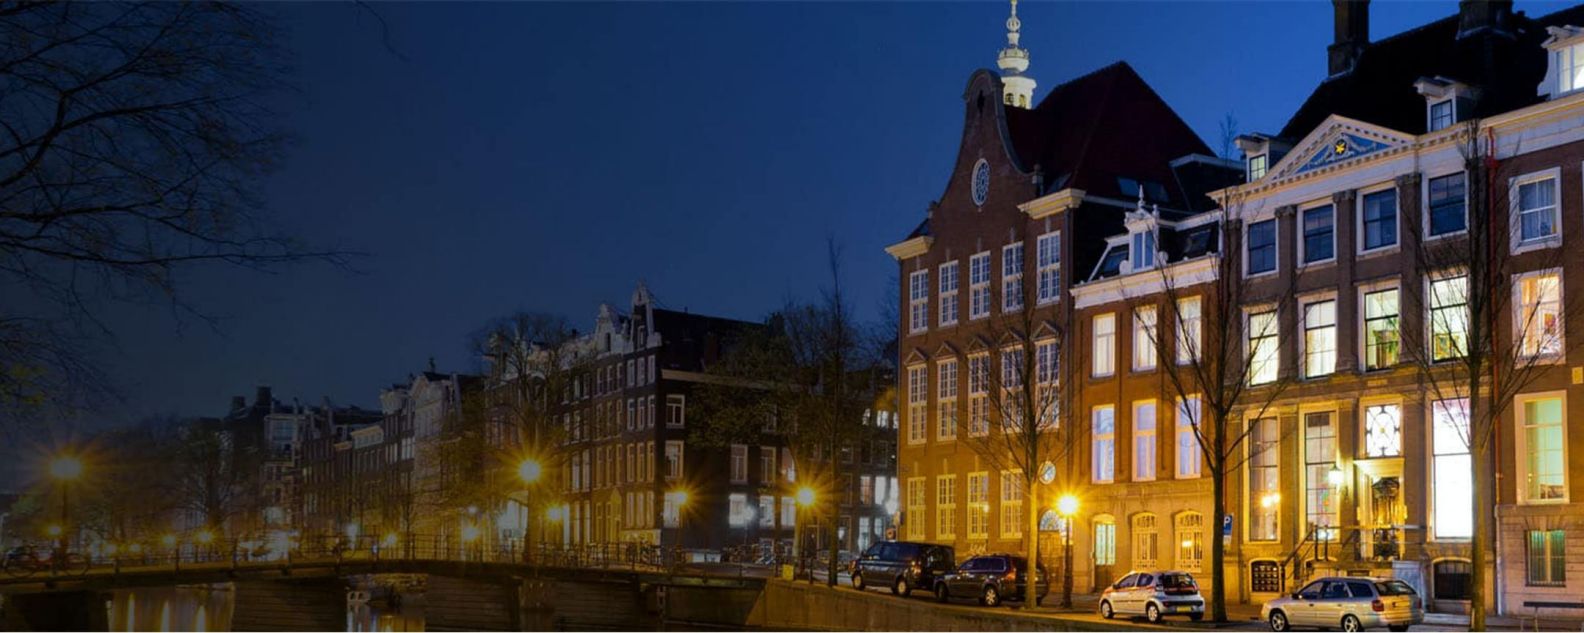 photo of traditional buildings with cars parked on the side of a street in Amsterdam, Netherlands